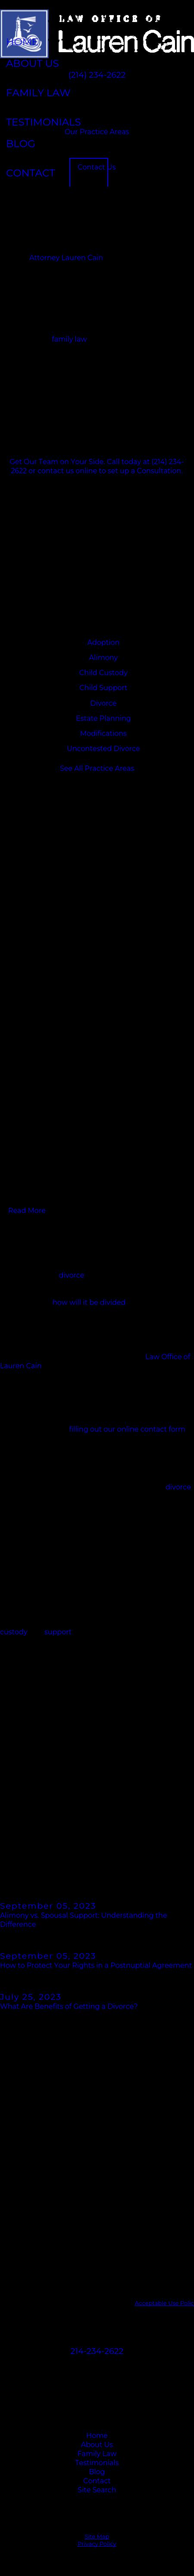 Law Office of Lauren Cain - Frisco TX Lawyers